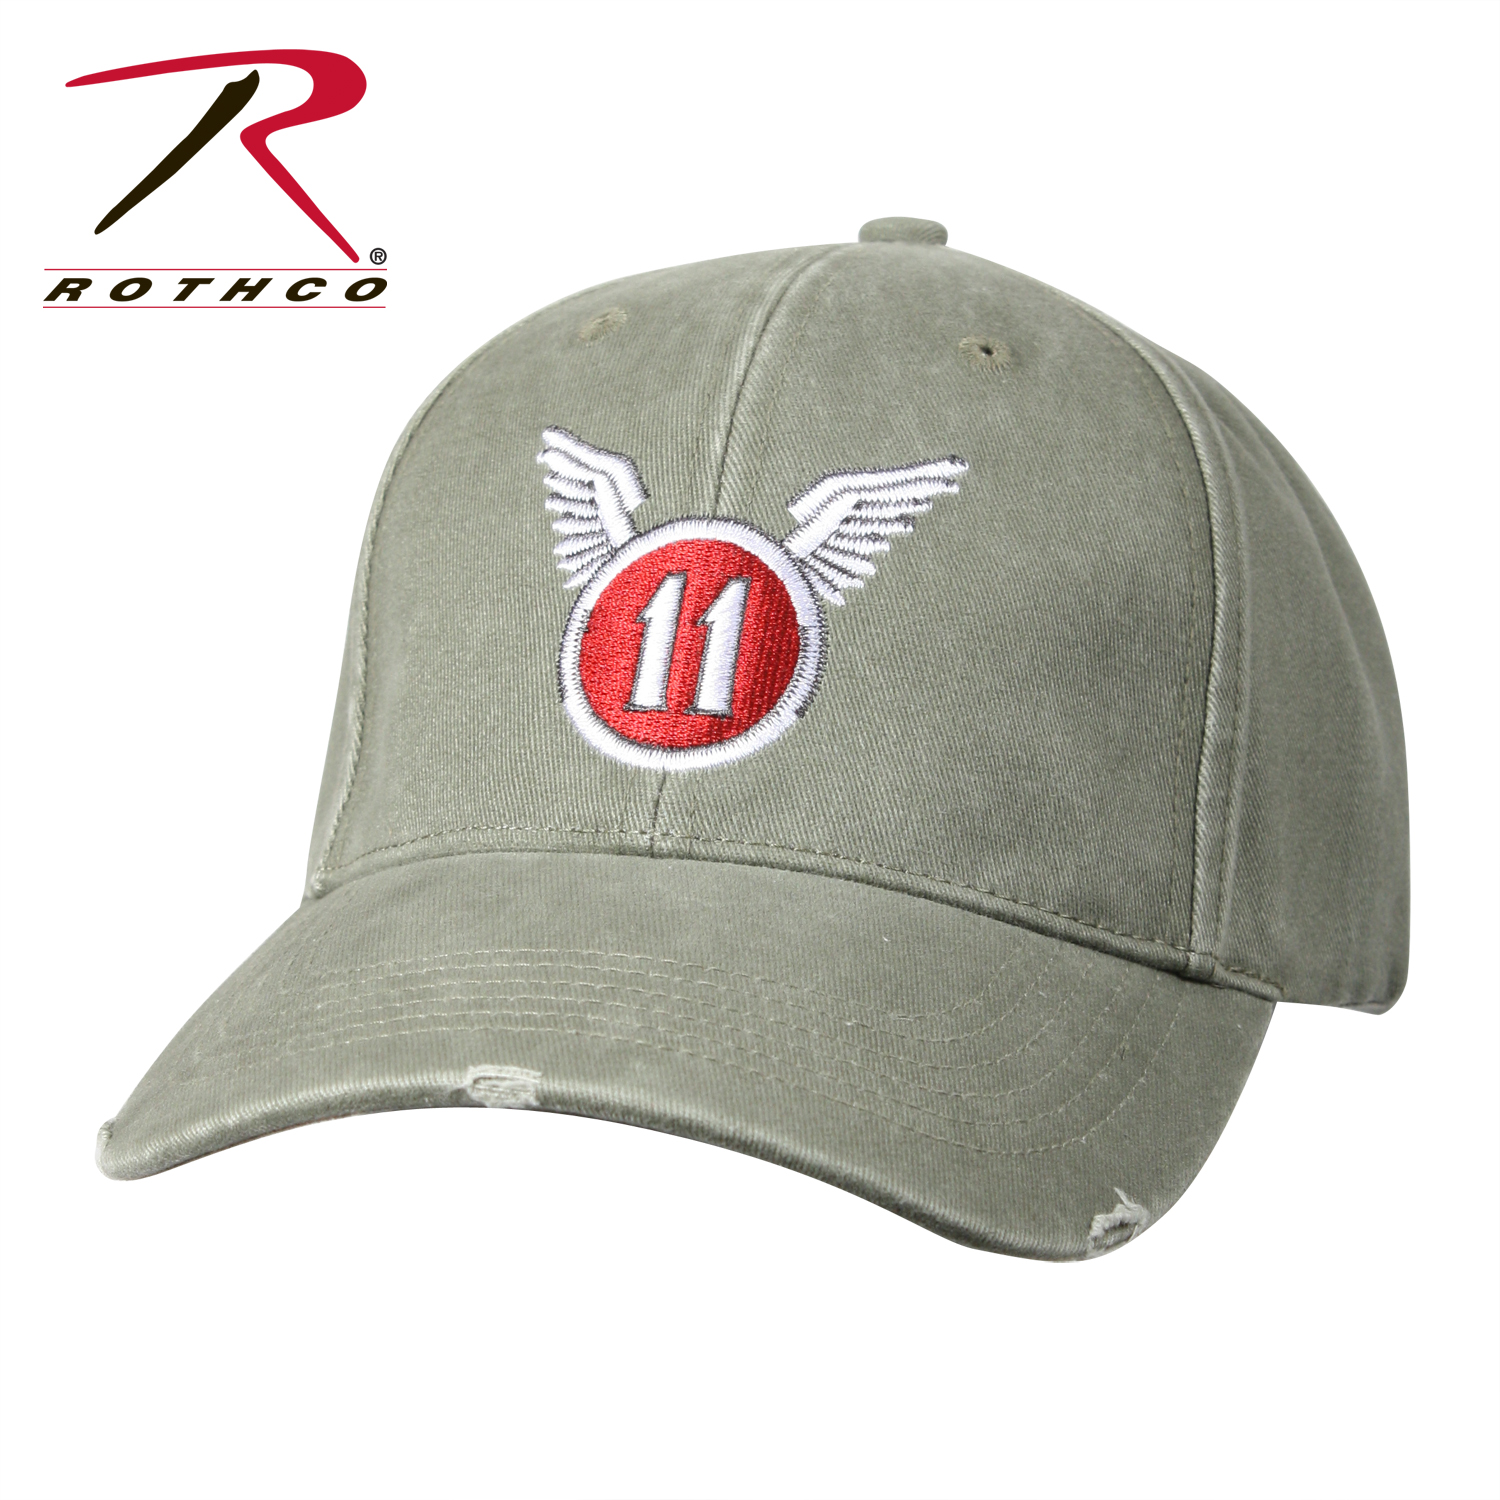 VINTAGE DELUXE INSIGNIA CAP - ROTHCO - 11TH AIRBONE